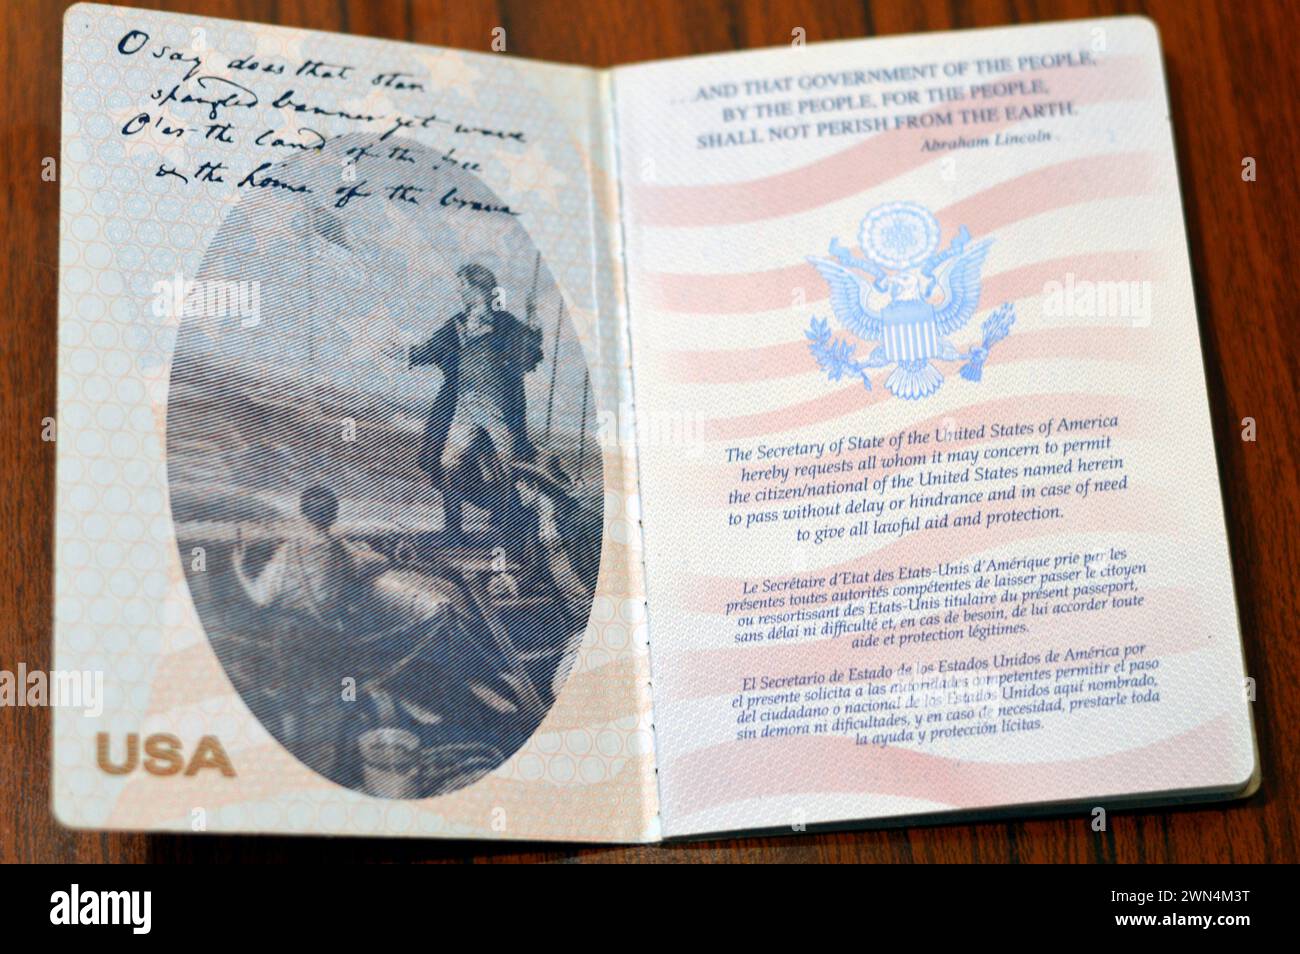 The United States of American passport, passports are issued to the American citizens and nationals, Travel, tourism concept, American visa and travel Stock Photo